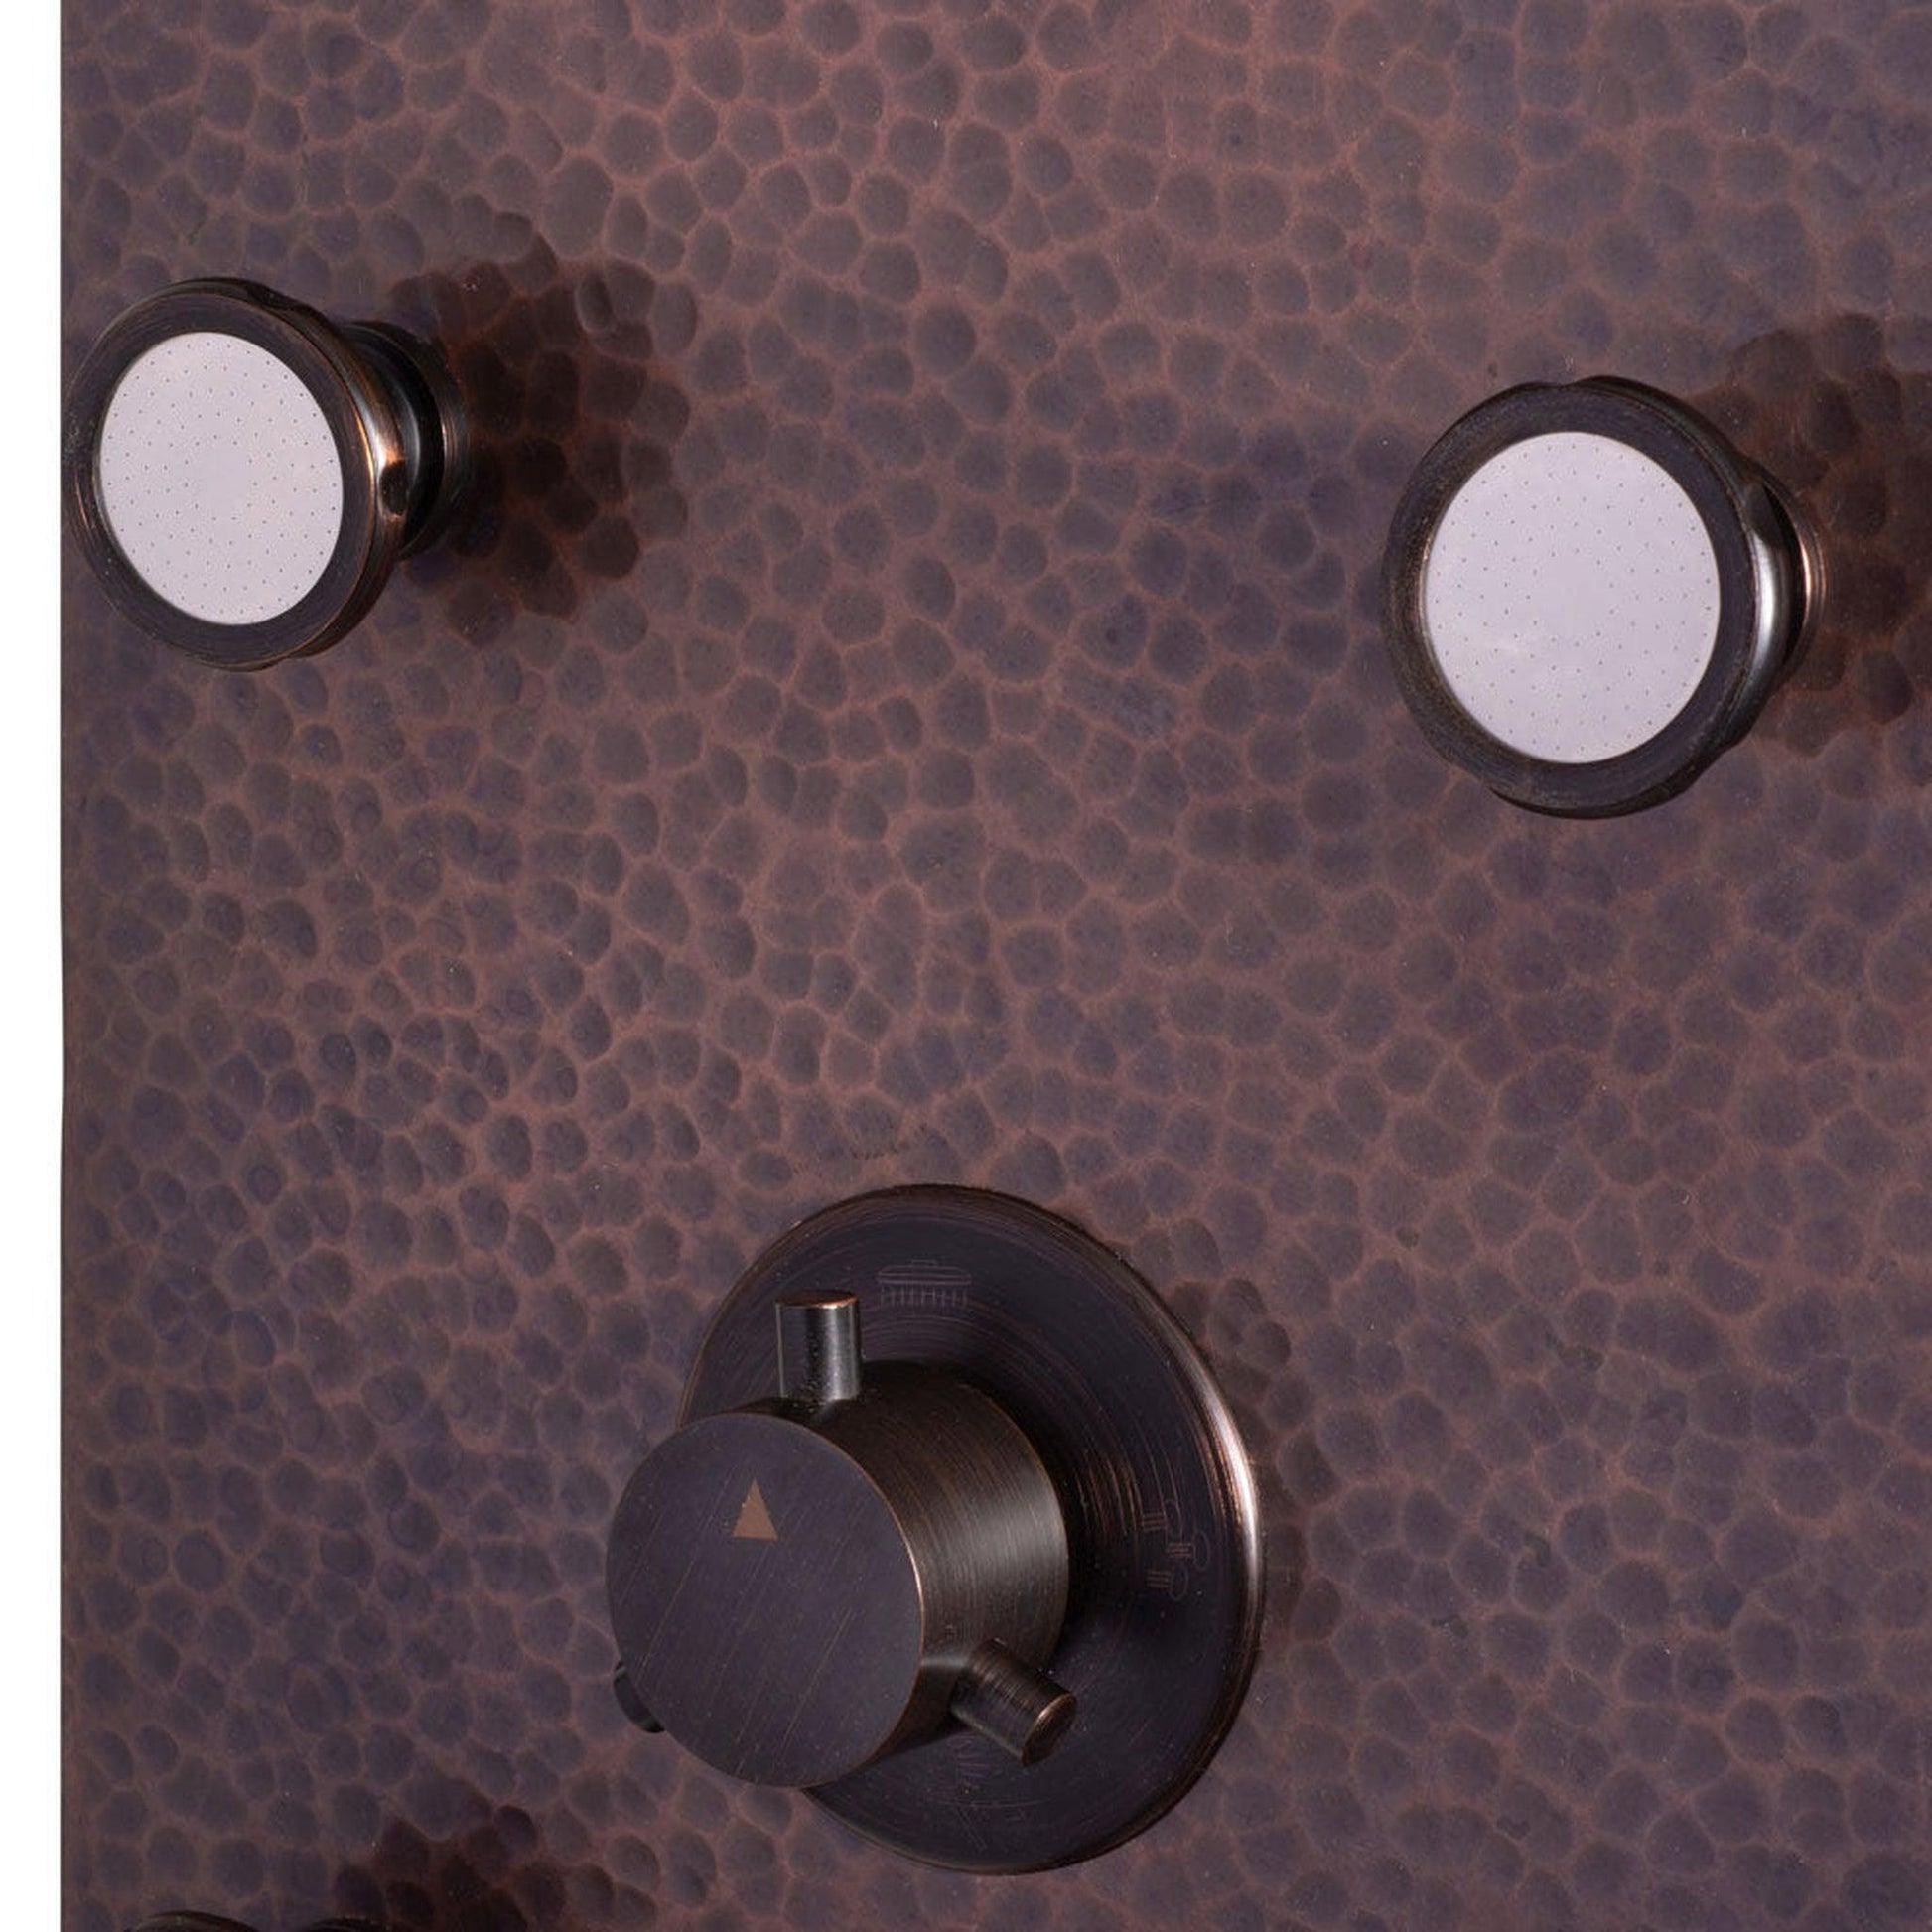 PULSE ShowerSpas Sedona 59" Hammered Copper Rain Shower Panel in Oil Rubbed Bronze Finish With 6-Silk Spray Body Jet and 5-Function Hand Shower